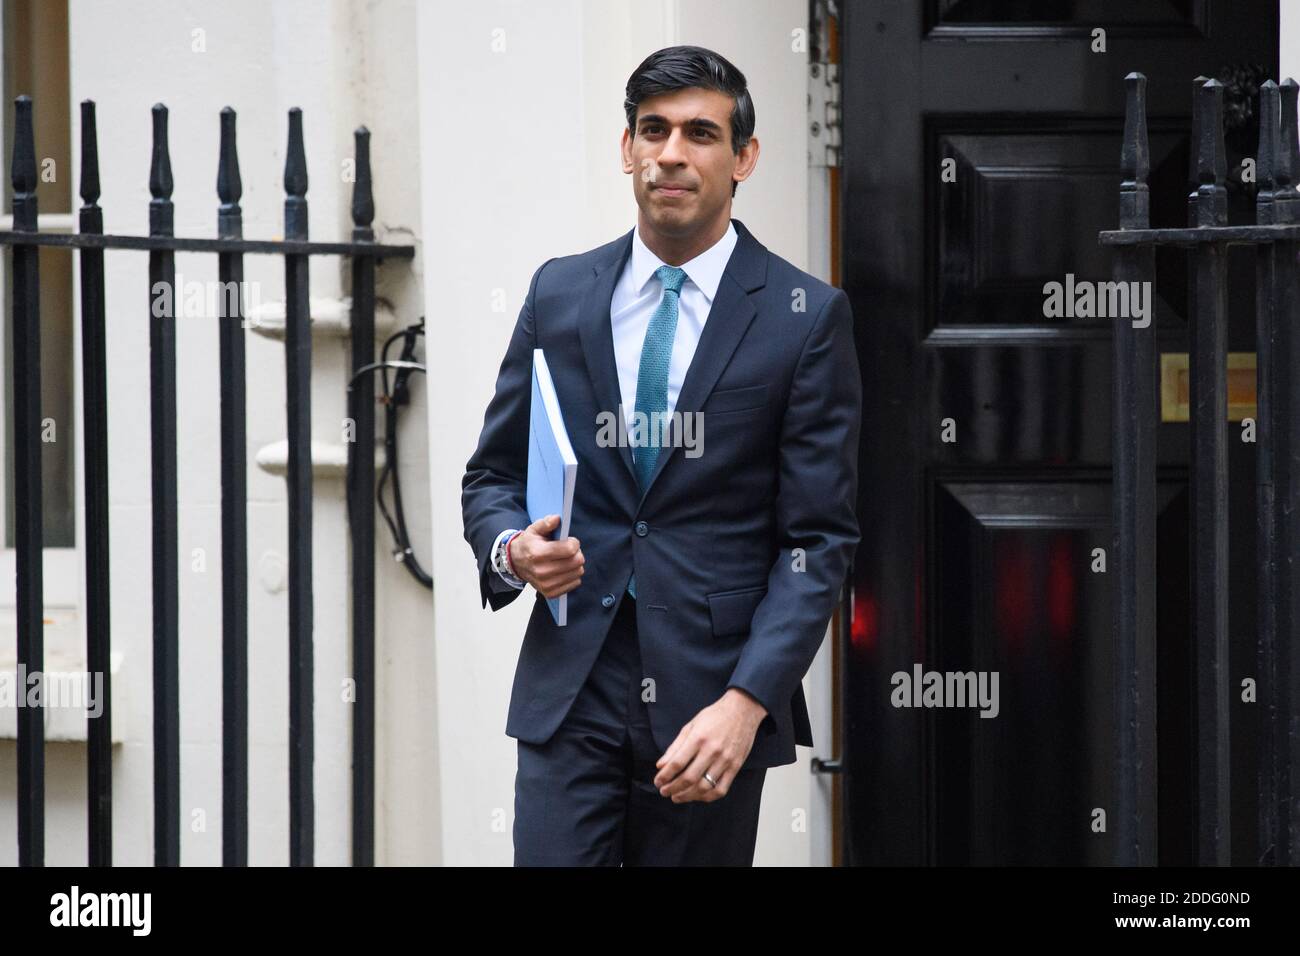 Downing Street, London, UK. 25th Nov 2020. Chancellor of the Exchequer Rishi Sunak leaves 11 Downing Street, London, ahead of delivering his one-year Spending Review in the House of Commons. Picture date: Wednesday November 25, 2020. Photo credit should read: Matt Crossick/Empics/Alamy Live News Stock Photo